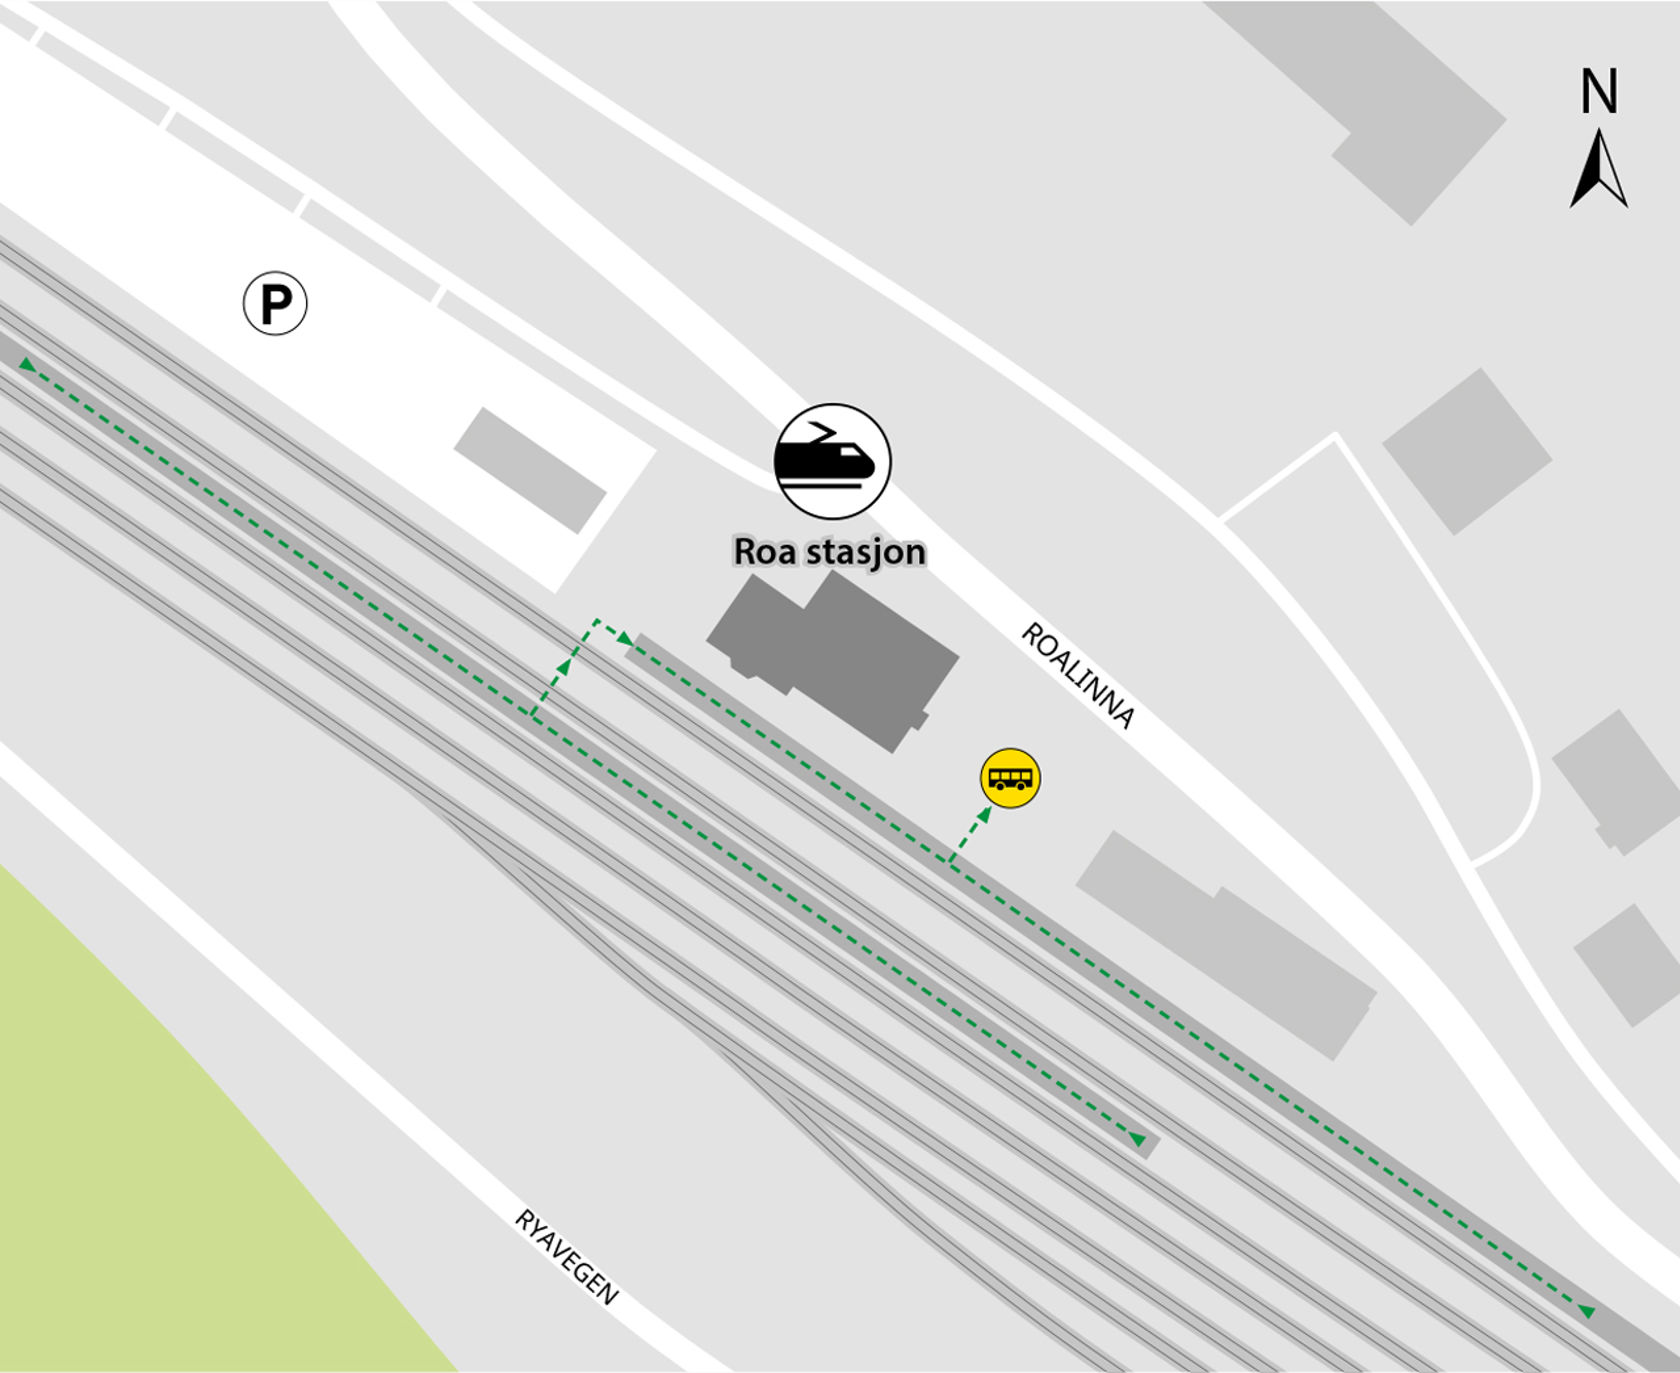 Map shows rail replacement service departs from the bus stop next to the station.